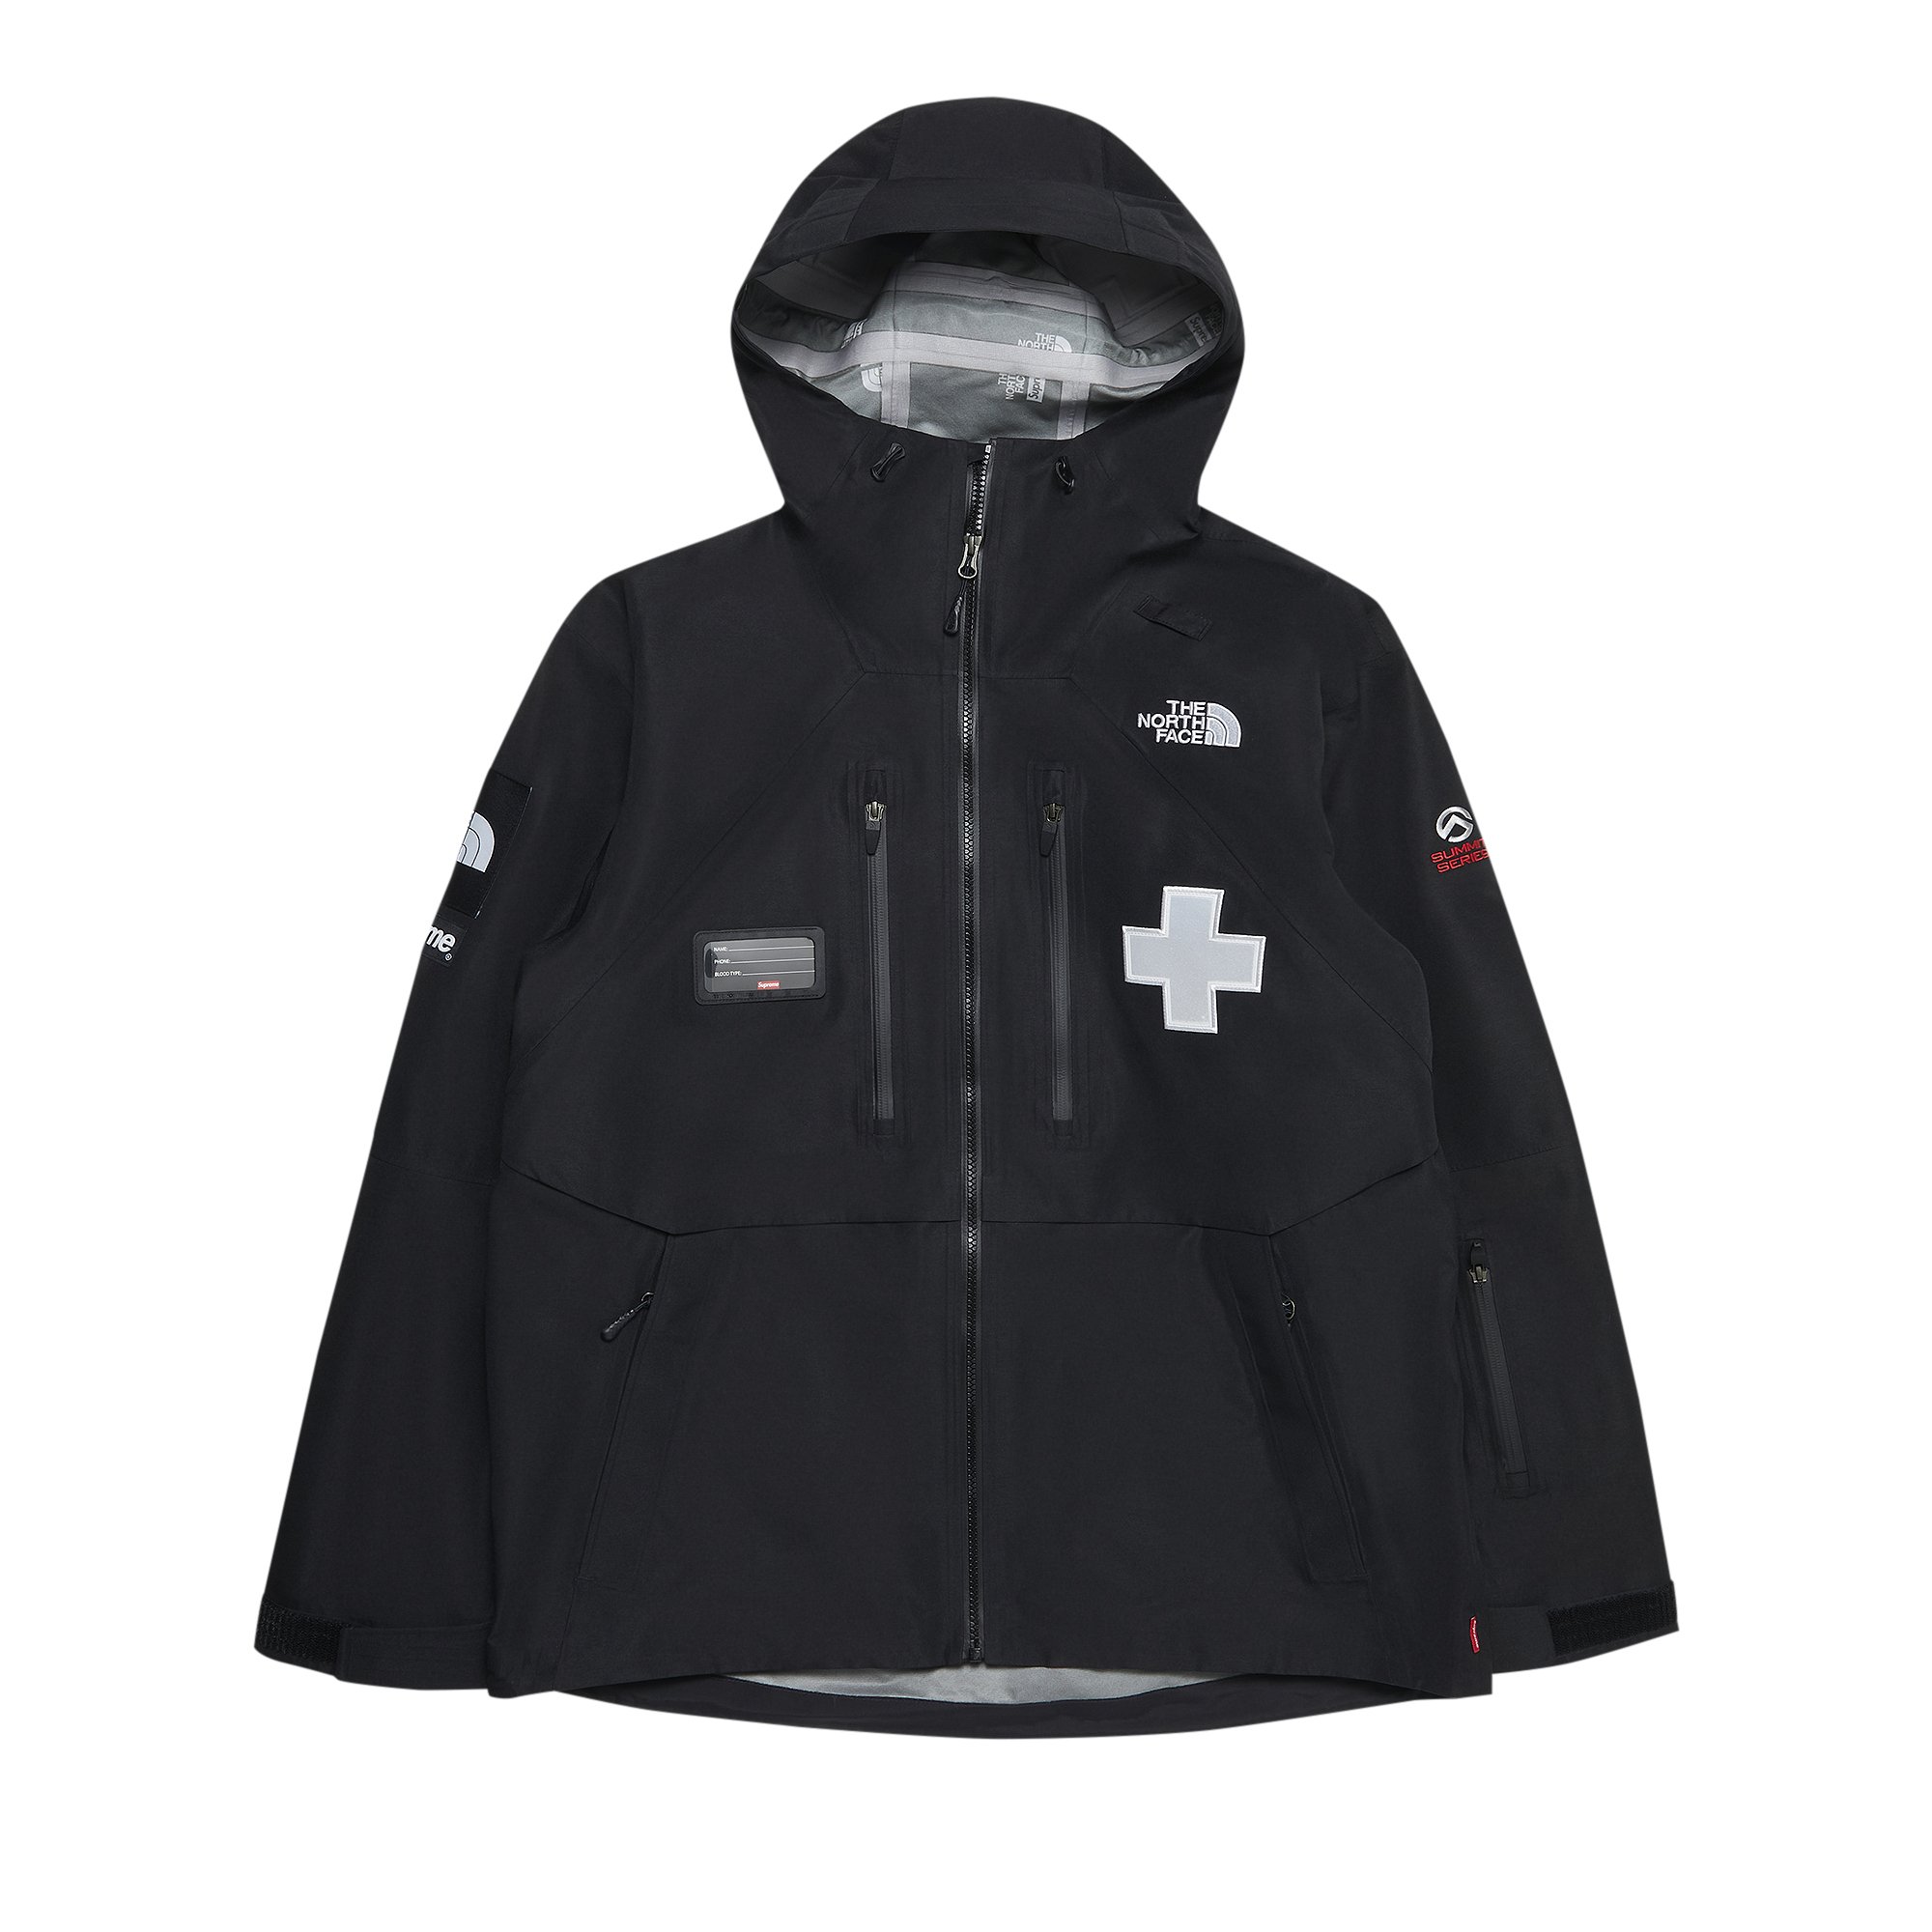 Supreme x The North Face Summit Series Rescue Mountain Pro Jacket 'Black'